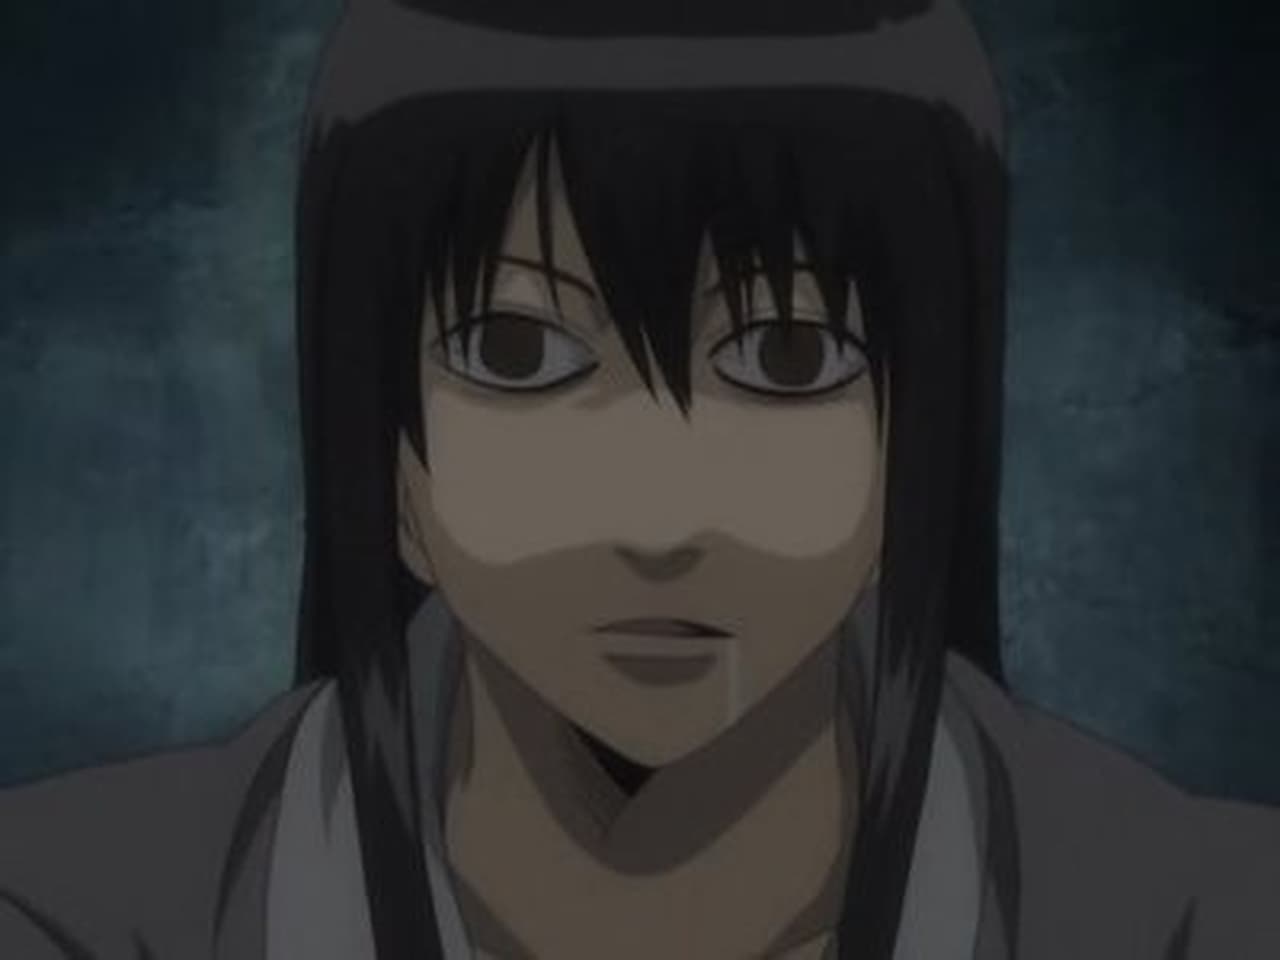 Gintama - Season 3 Episode 11 : People Are All Escapees of Their Own Inner Prisons